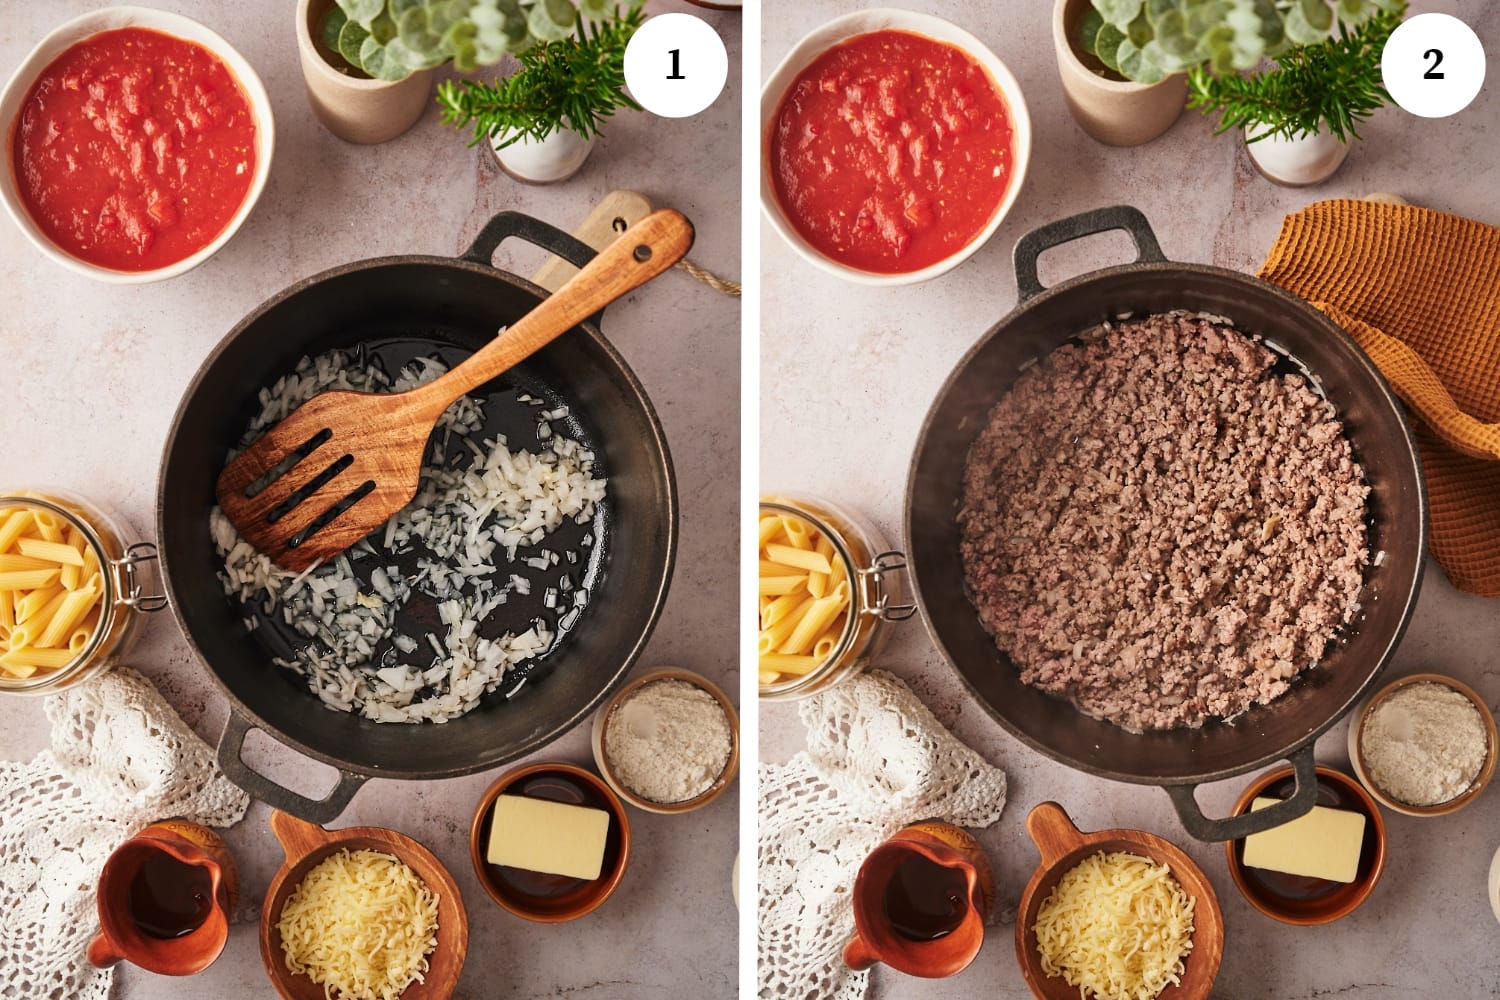 baked penne procedure: first photo is a saucepan with a wooden spoon and onions in it. around the pan are some ingredients for baked penne. Second photo is a saucepan with ground beef.